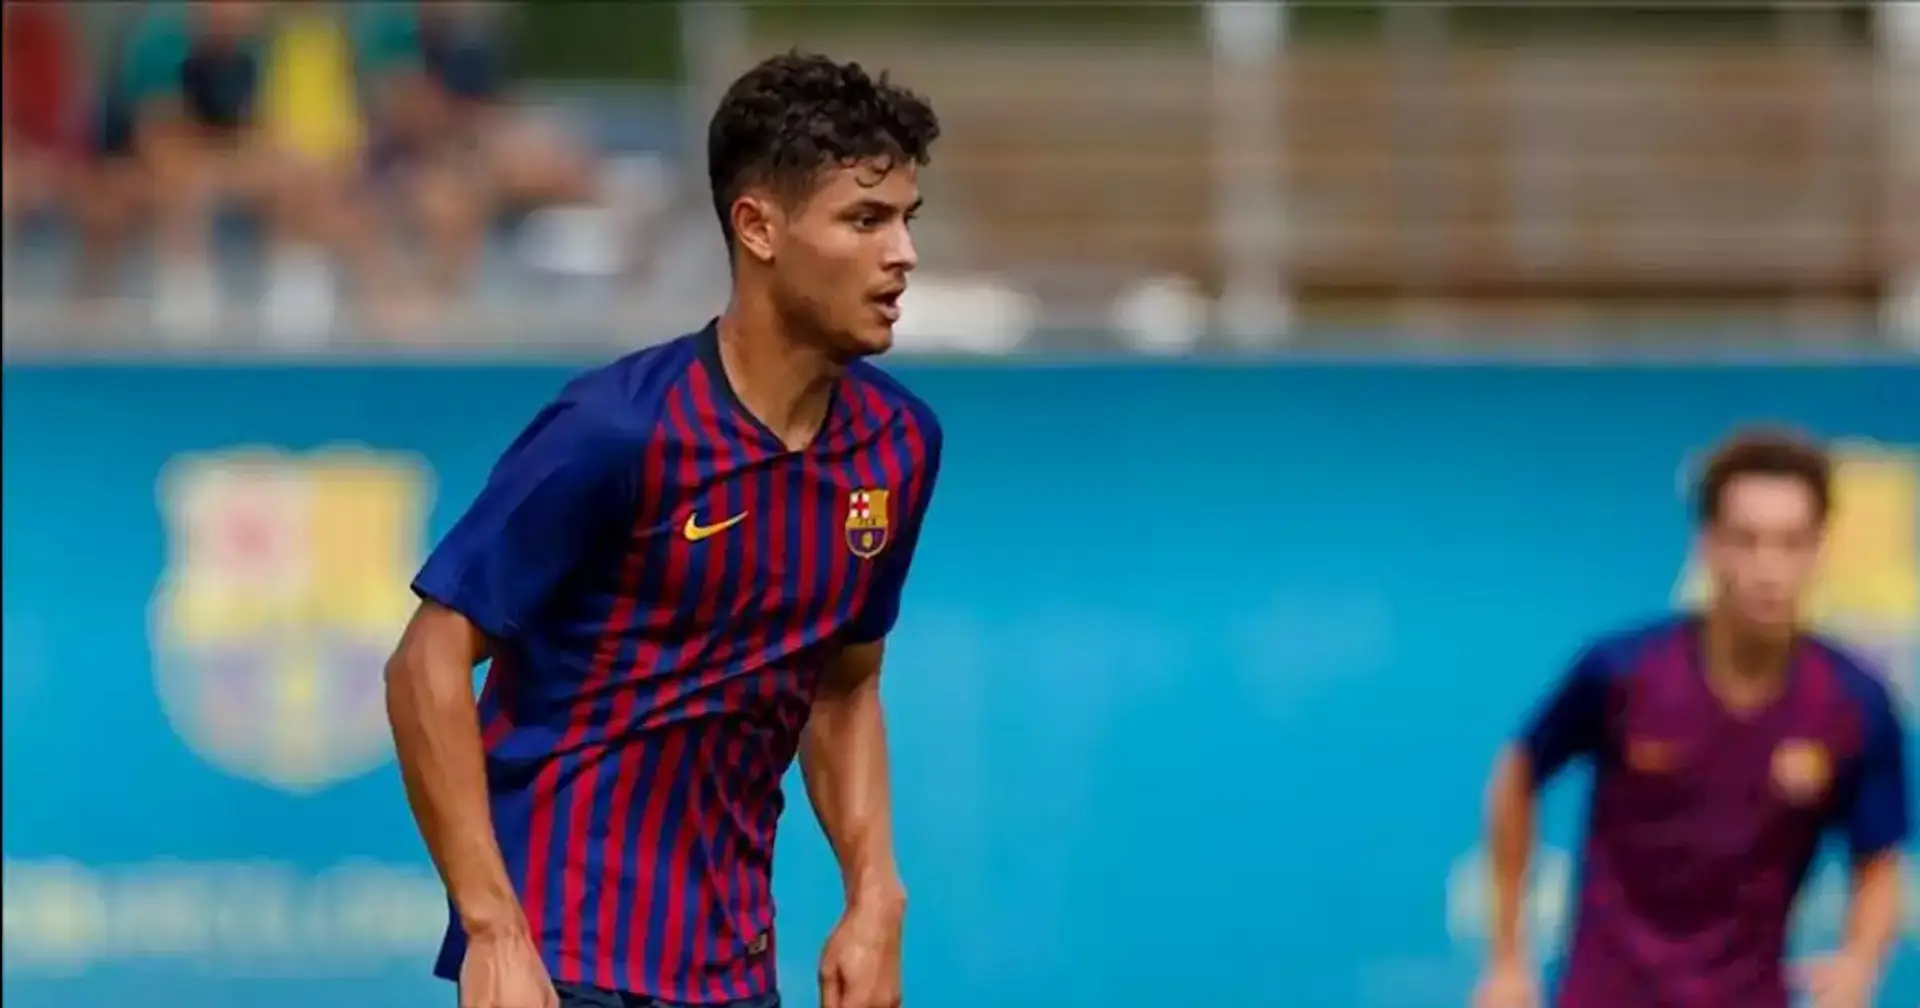 Spurs 'could meet' Barca's €4m price tag on highly-talented youngster De Vega